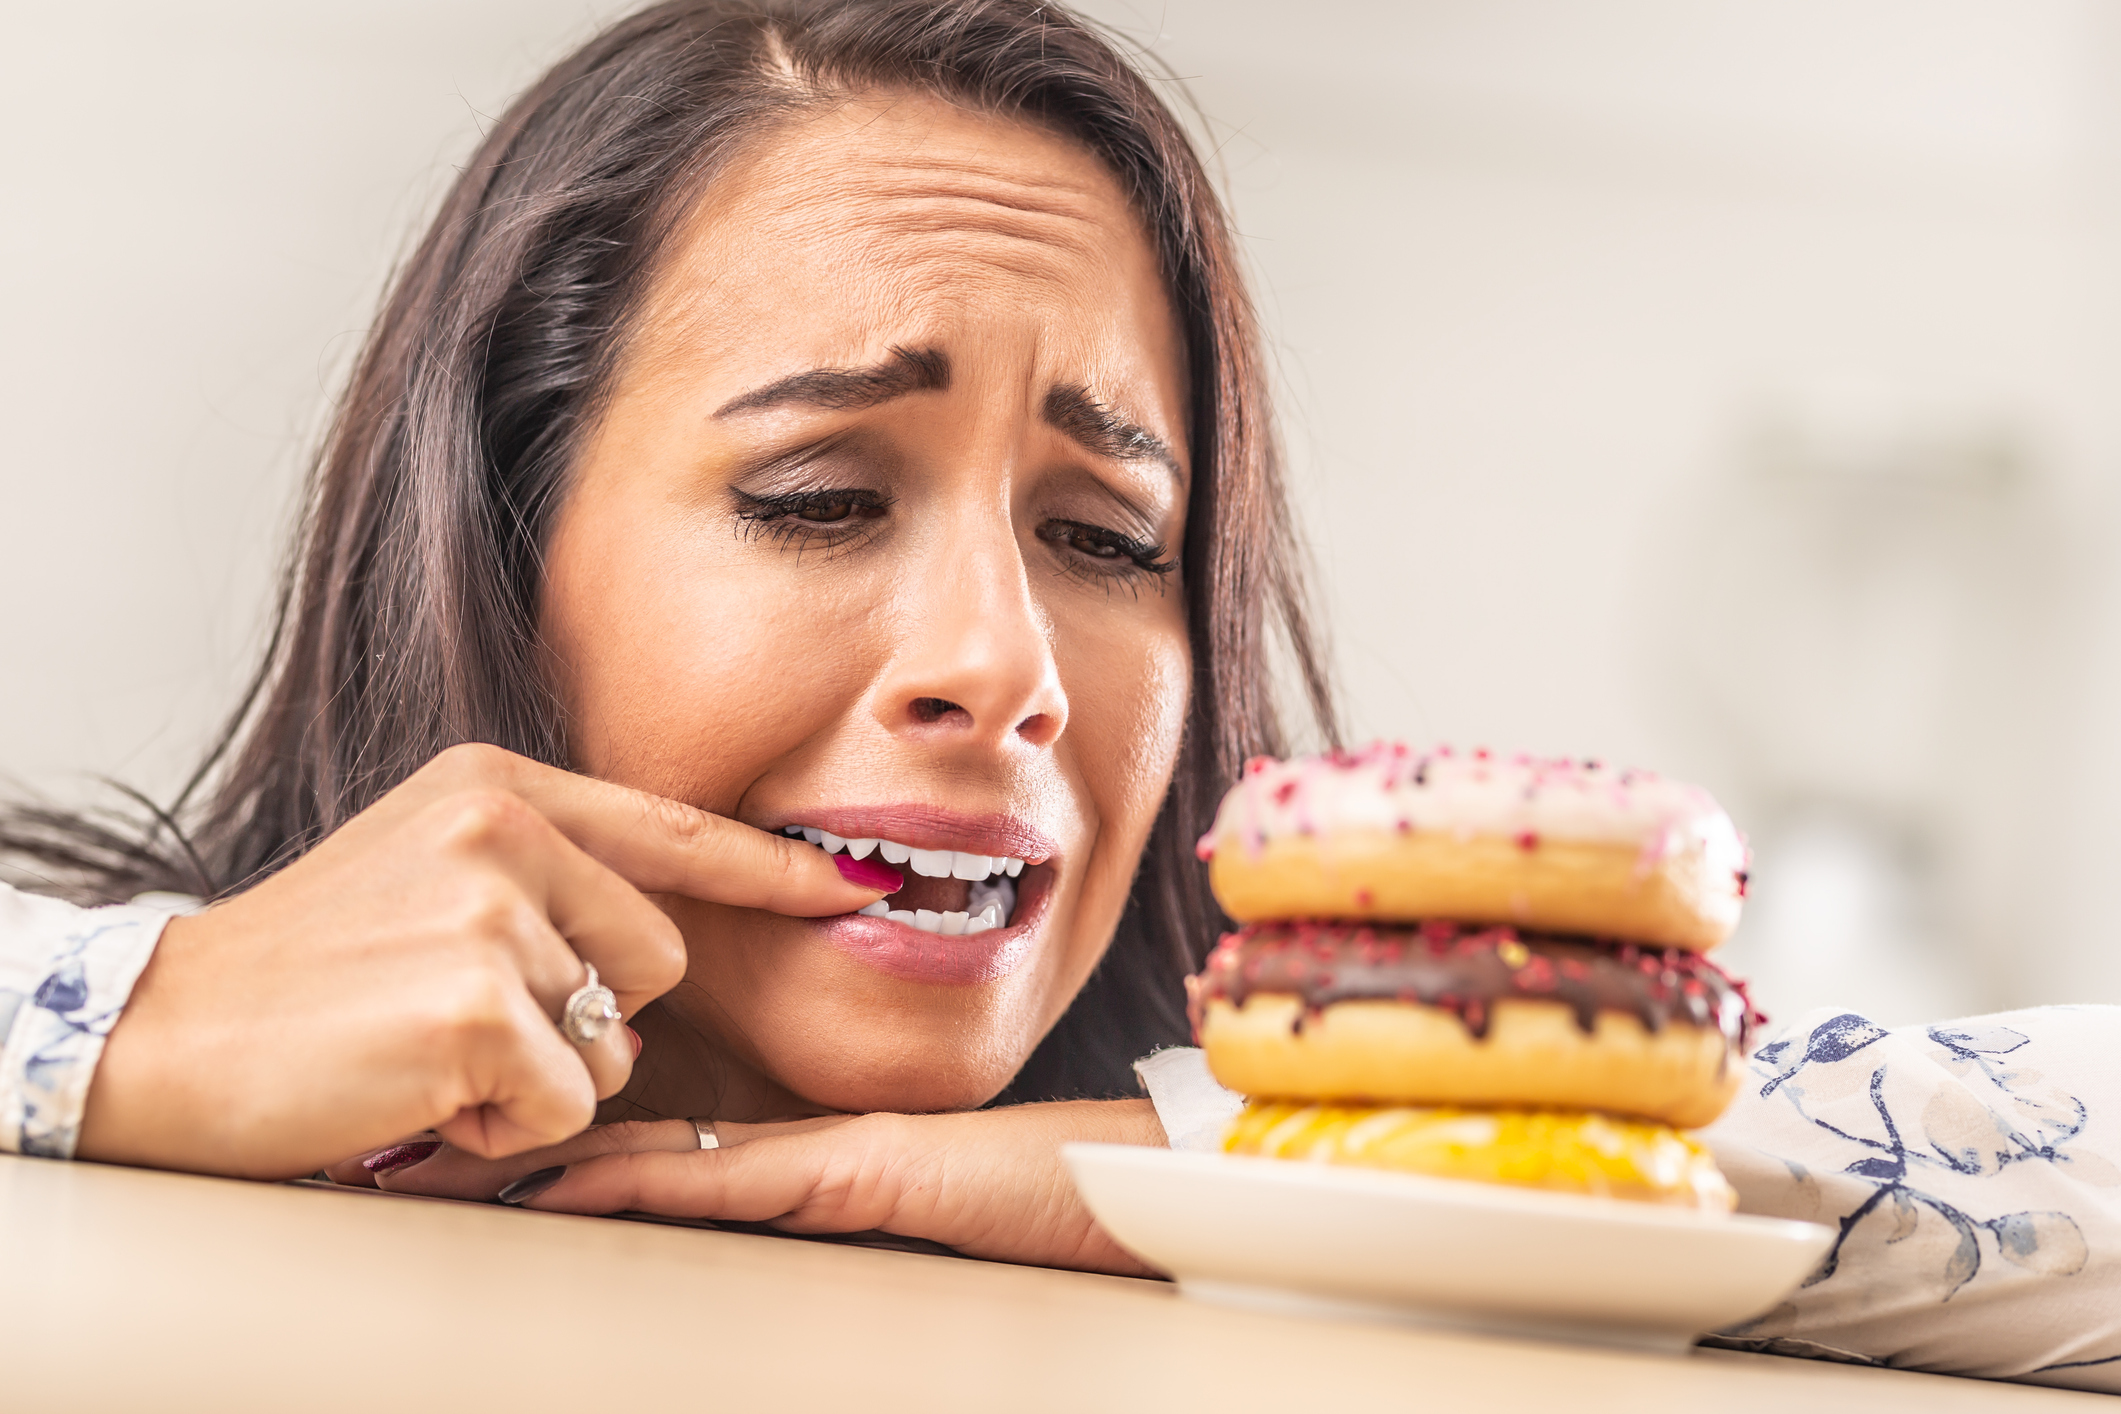 Woman biting the nail of her forefinger to prevent her hand from taking a donut.